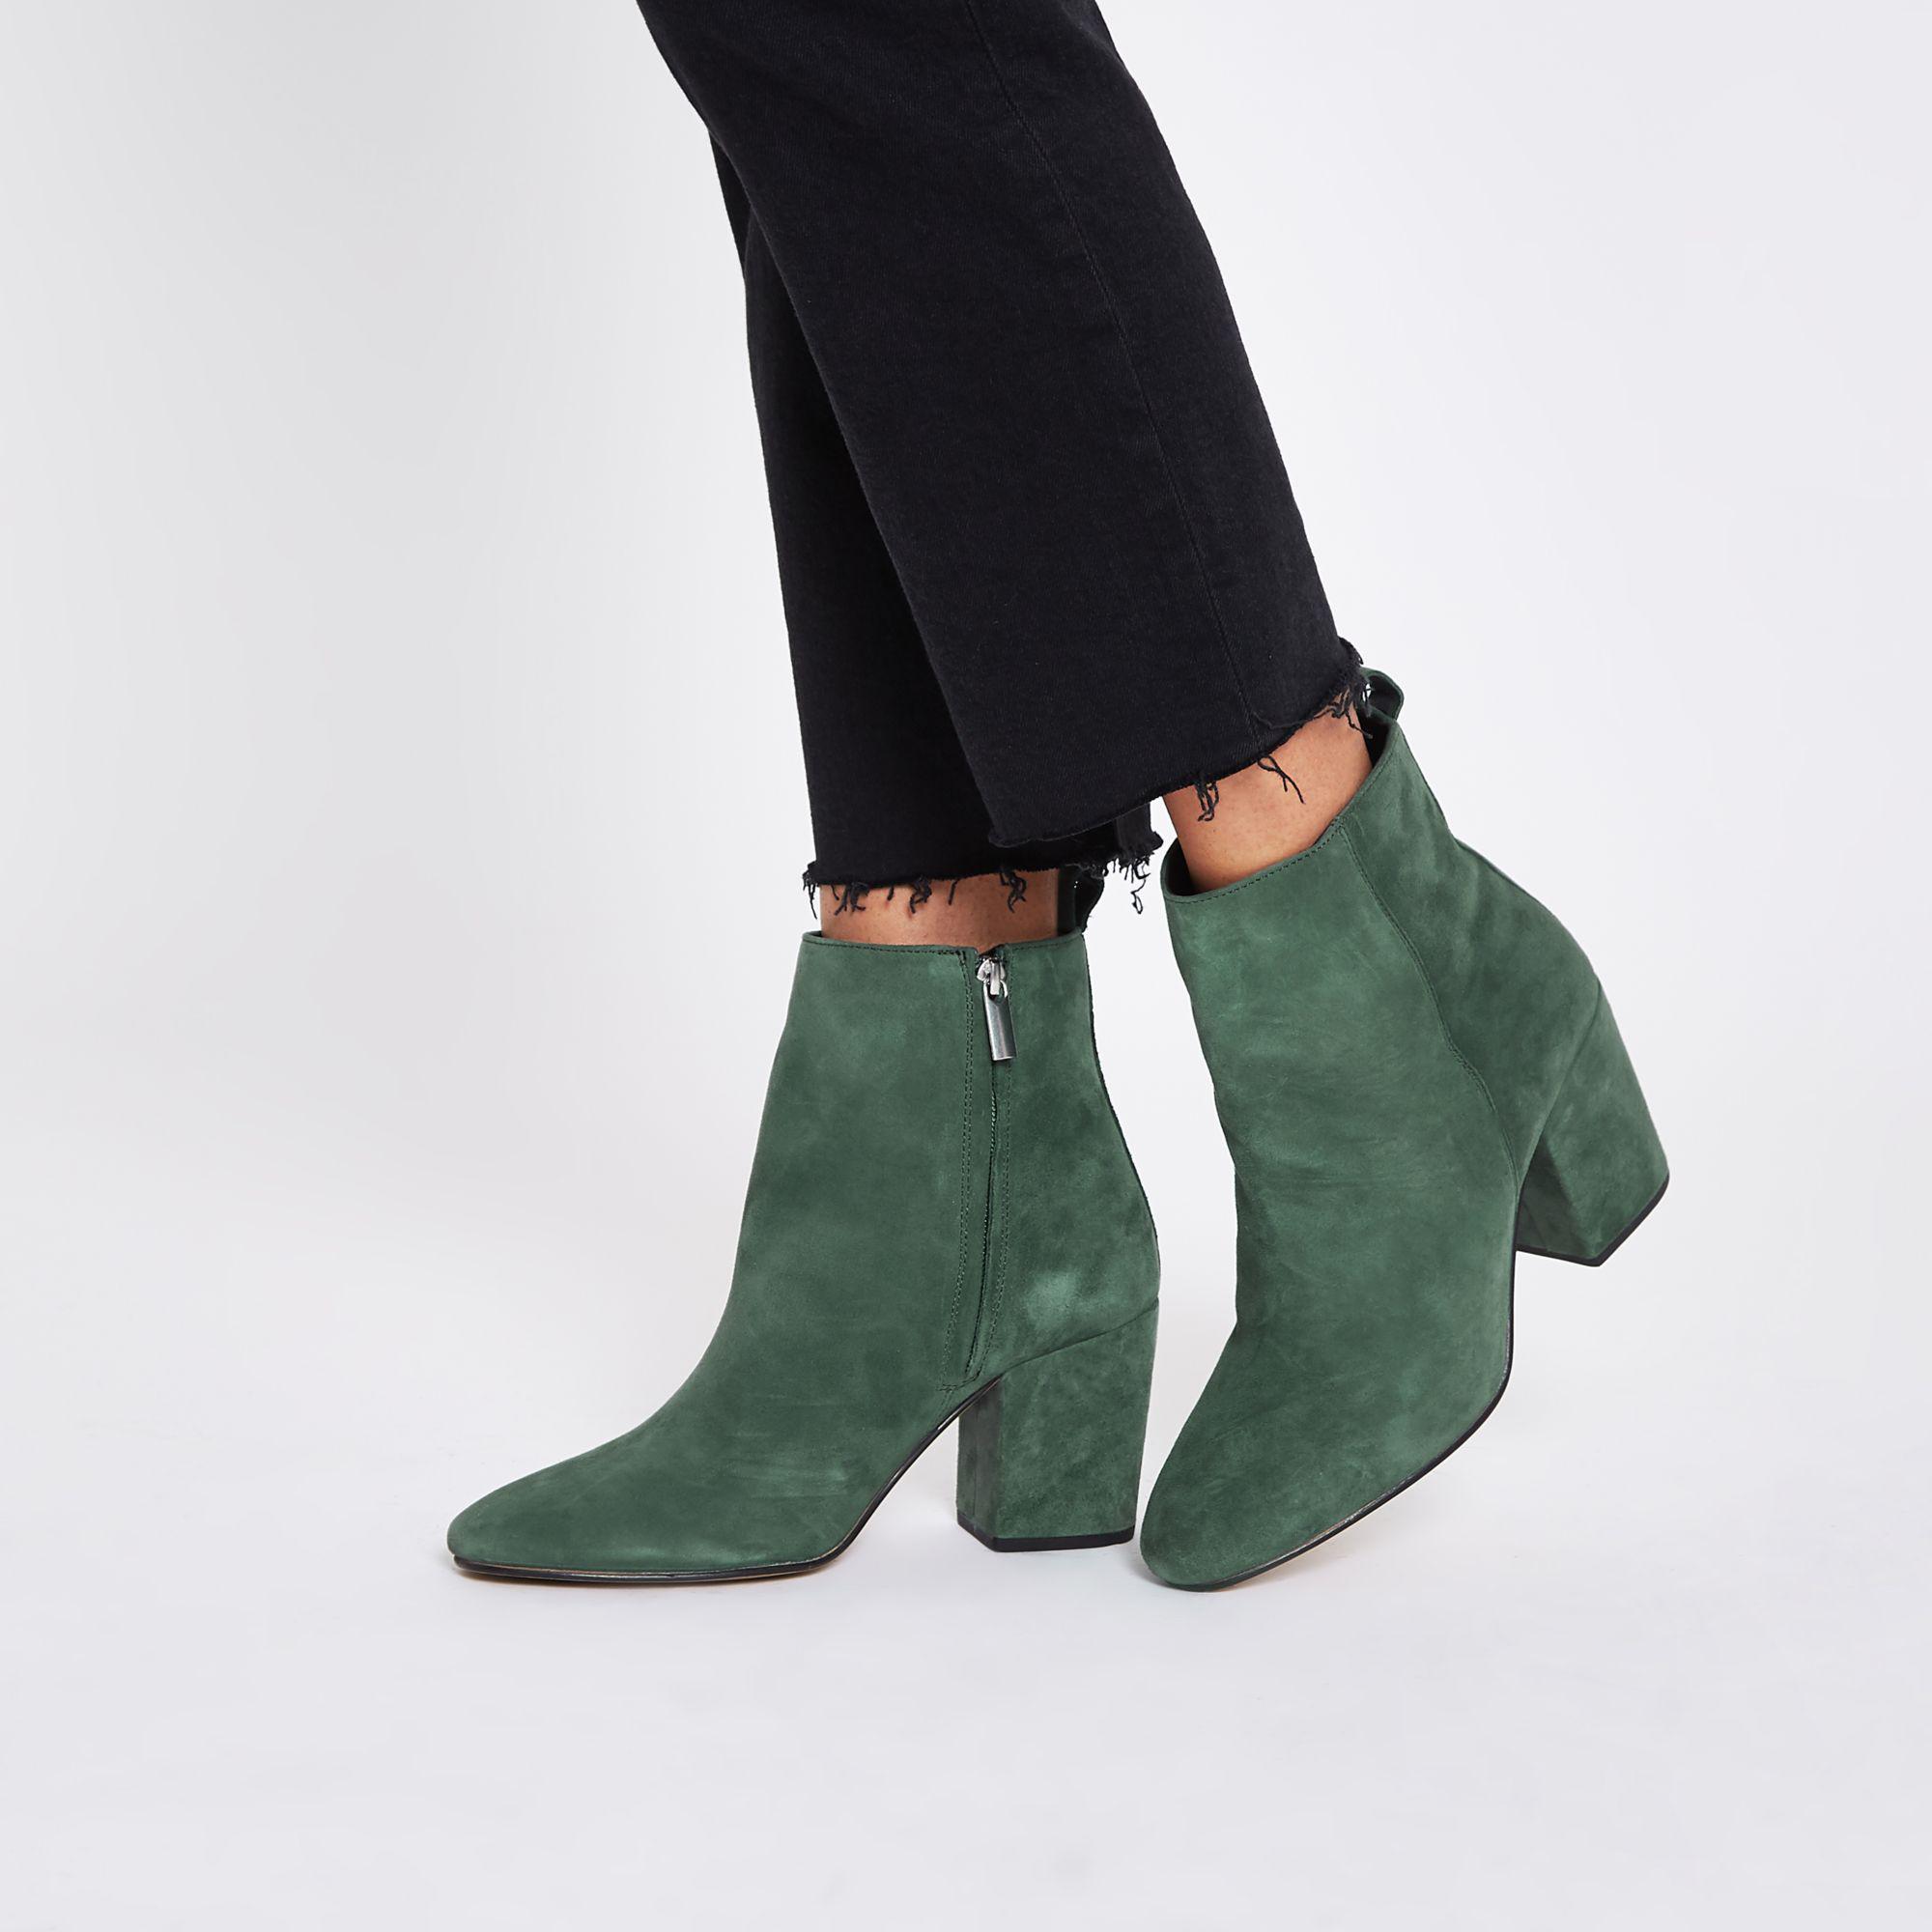 river island green boots